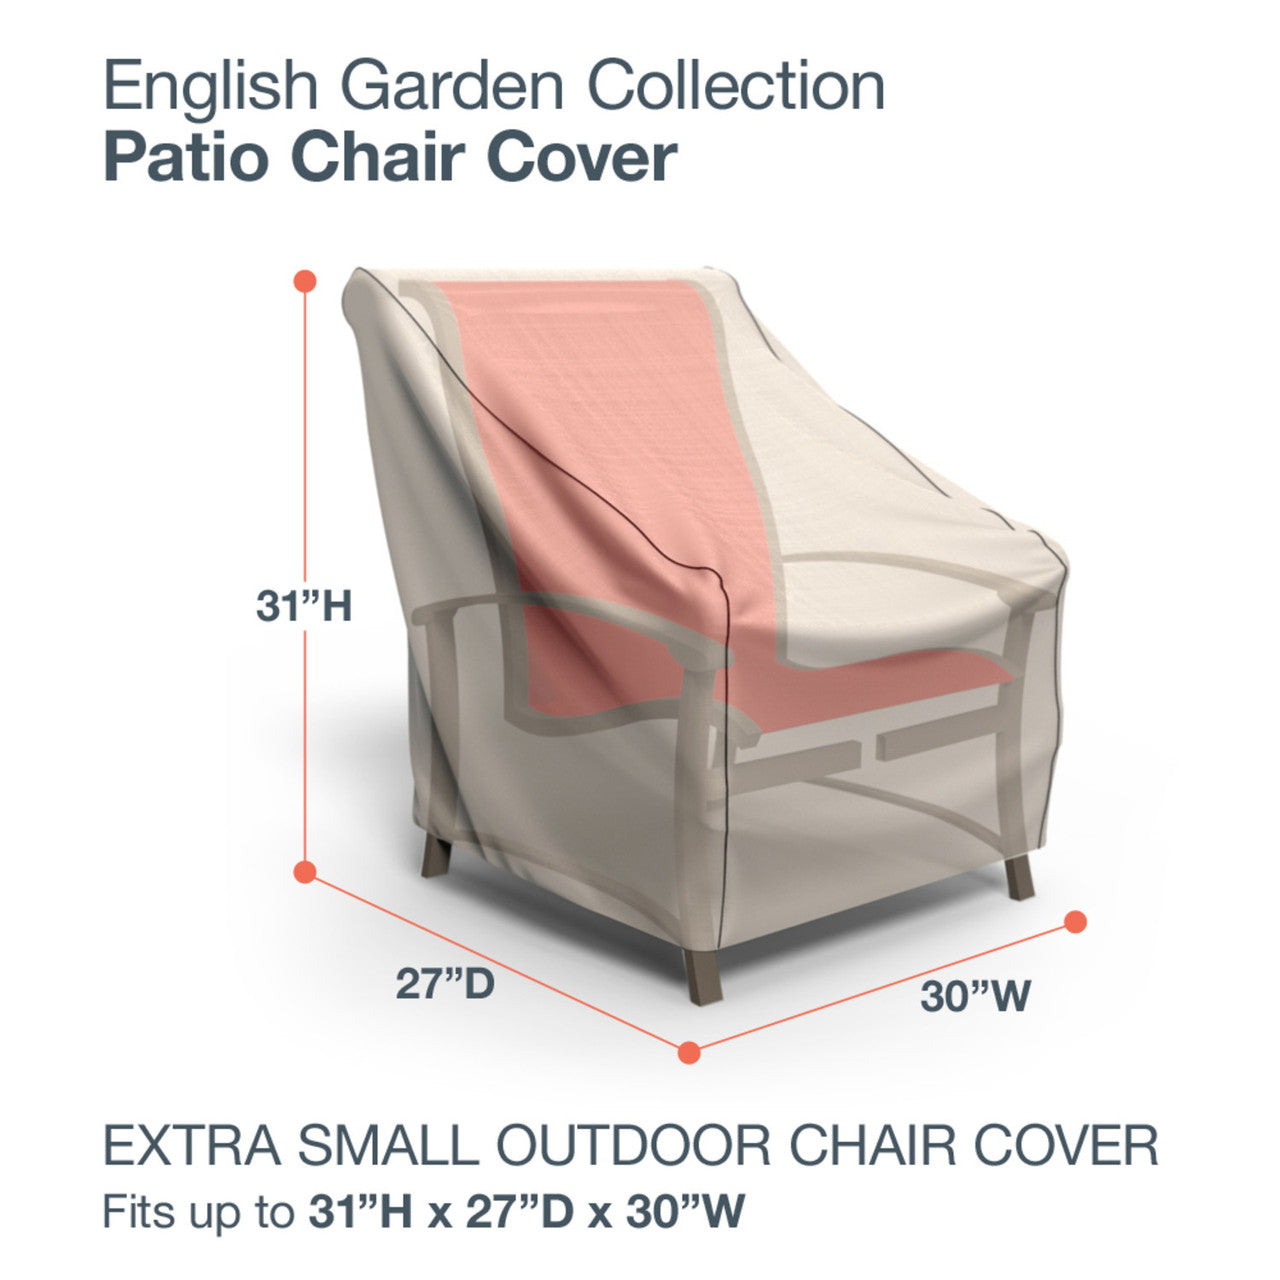 Budge Industries English Garden Patio Chair Cover